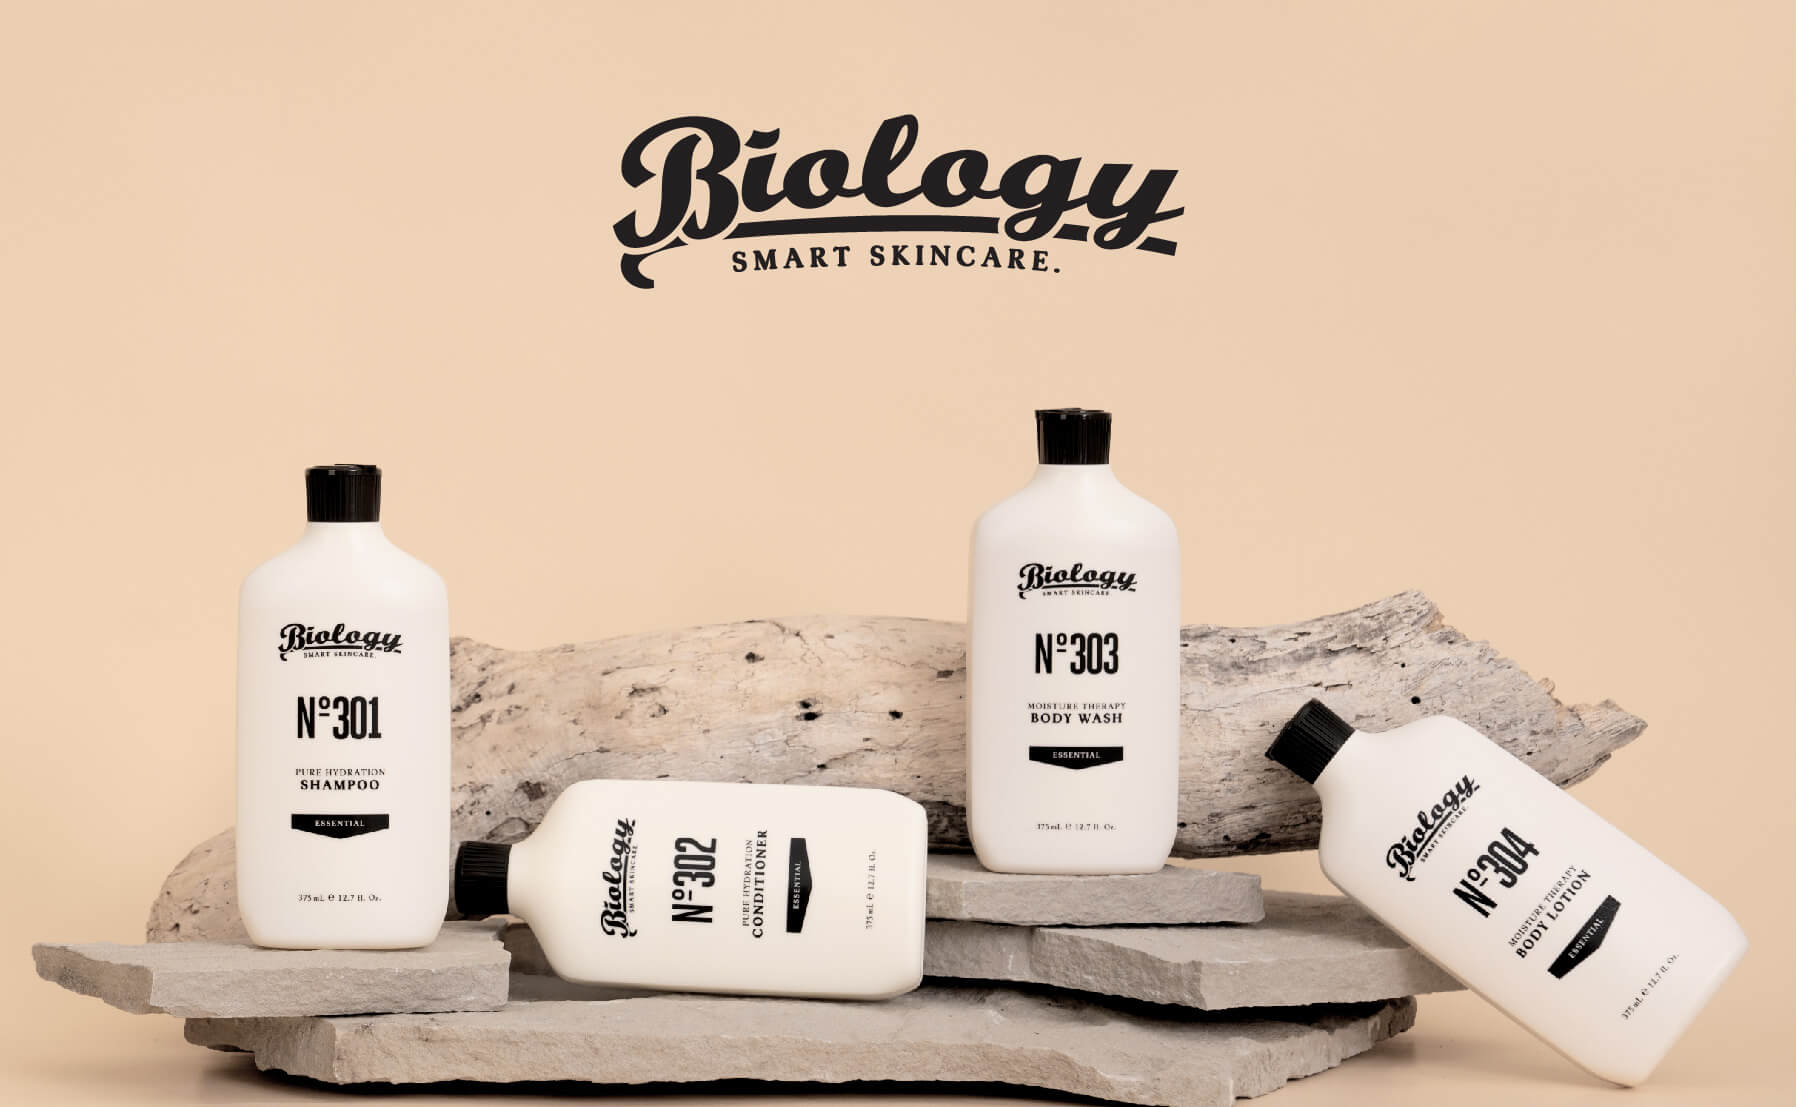 Biology skincare hotel collection